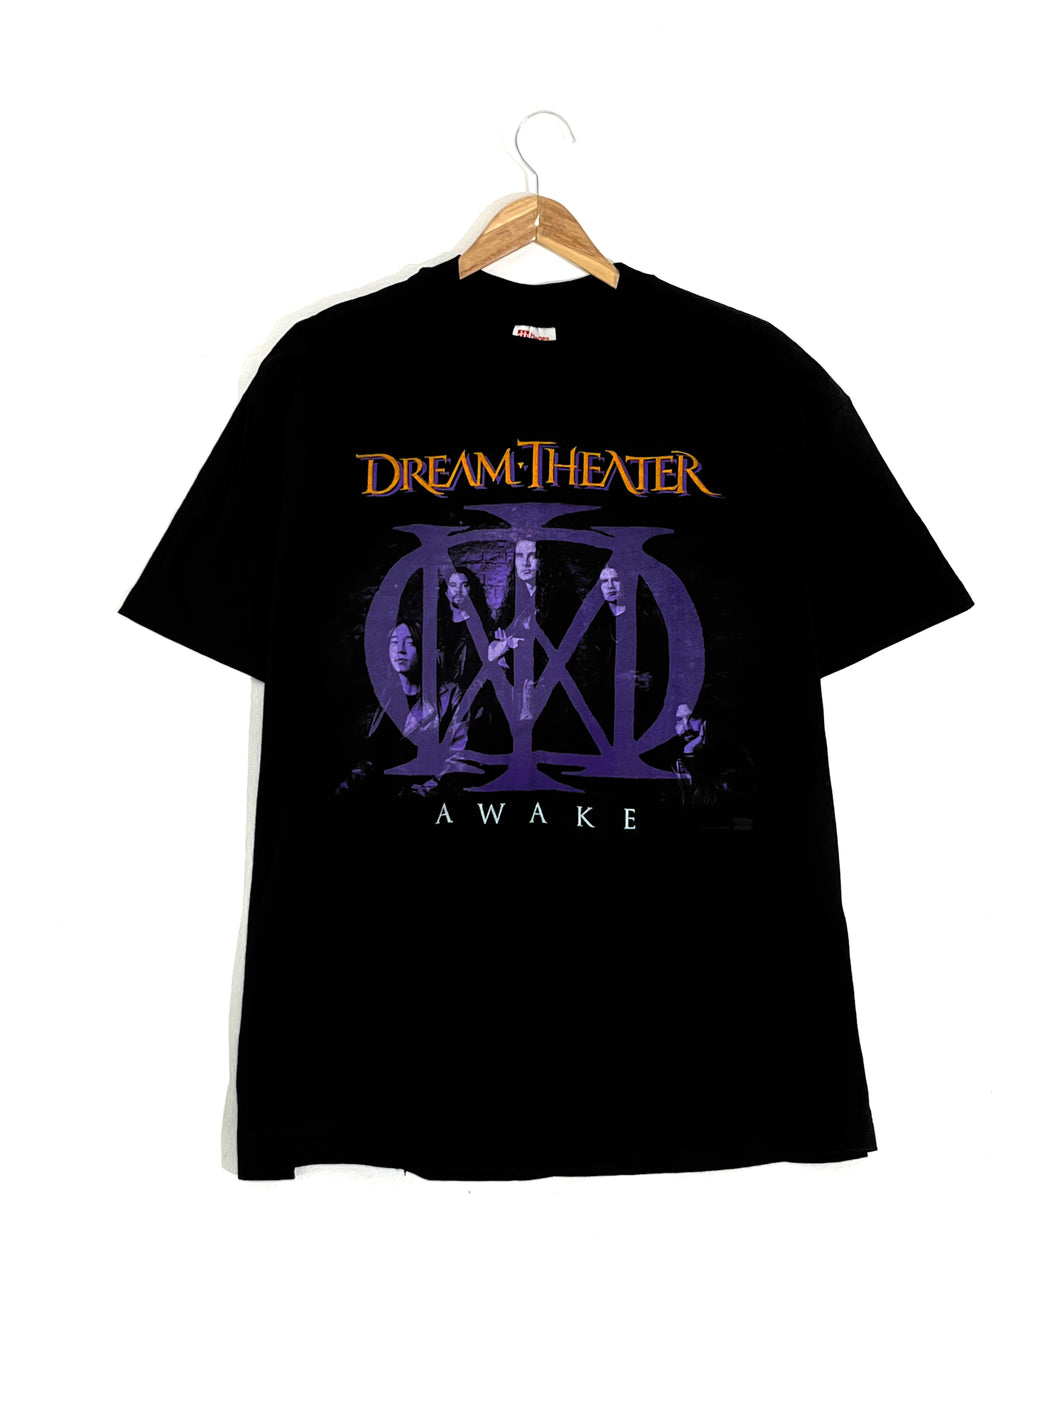 SOLD !Vintage Dream theater (XL)